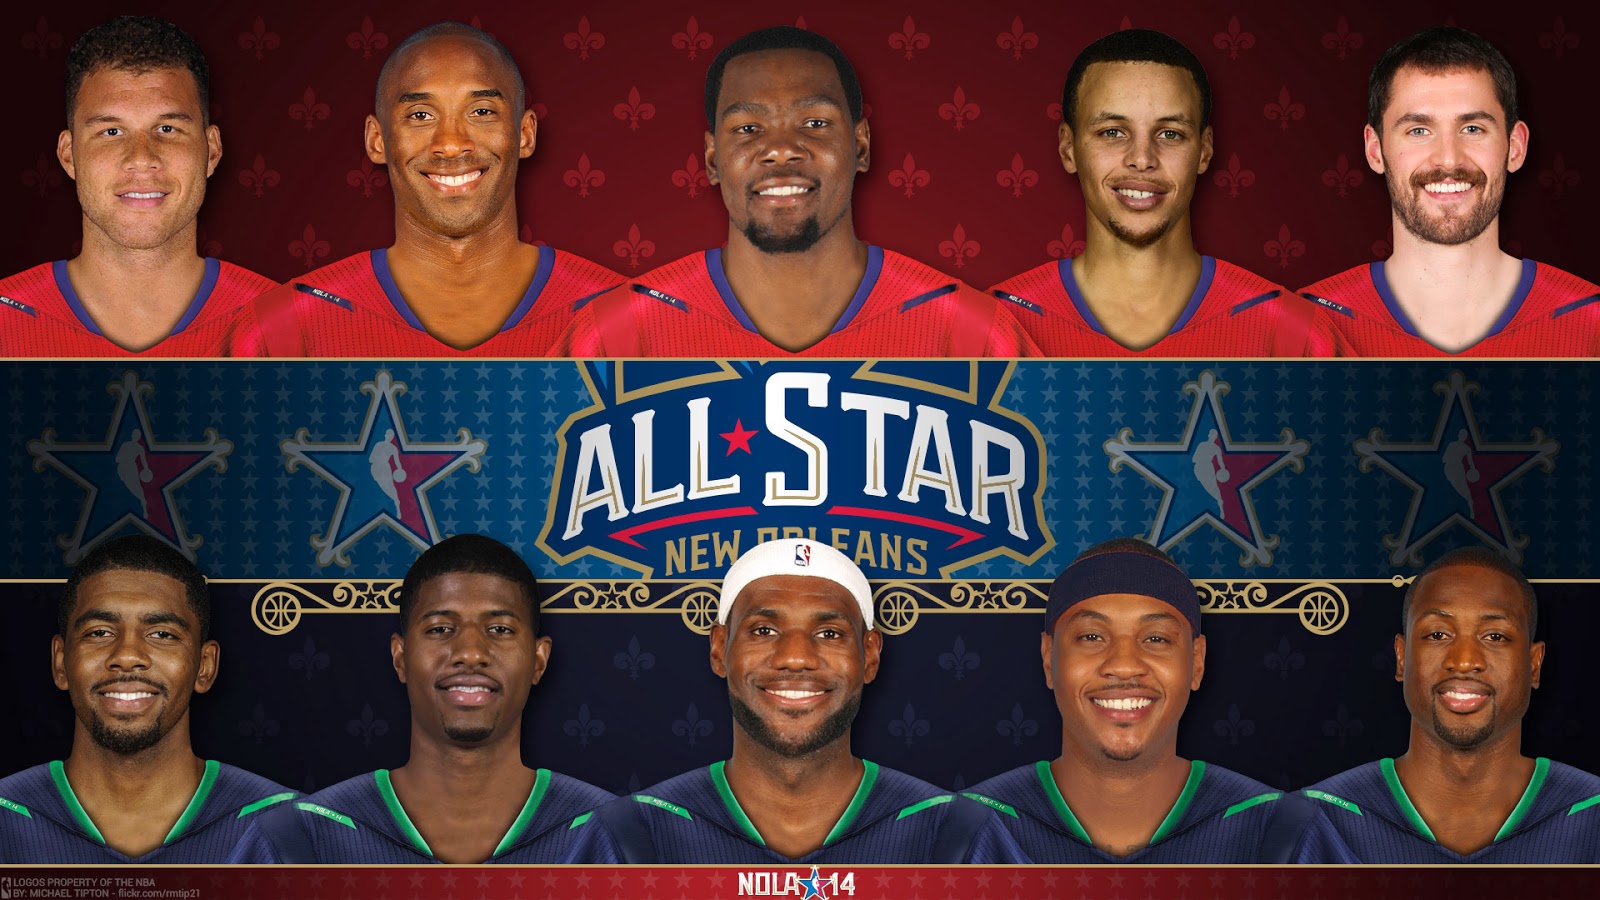 Badboys Deluxe Nba 63rd All Stars Game East Wins Vs West